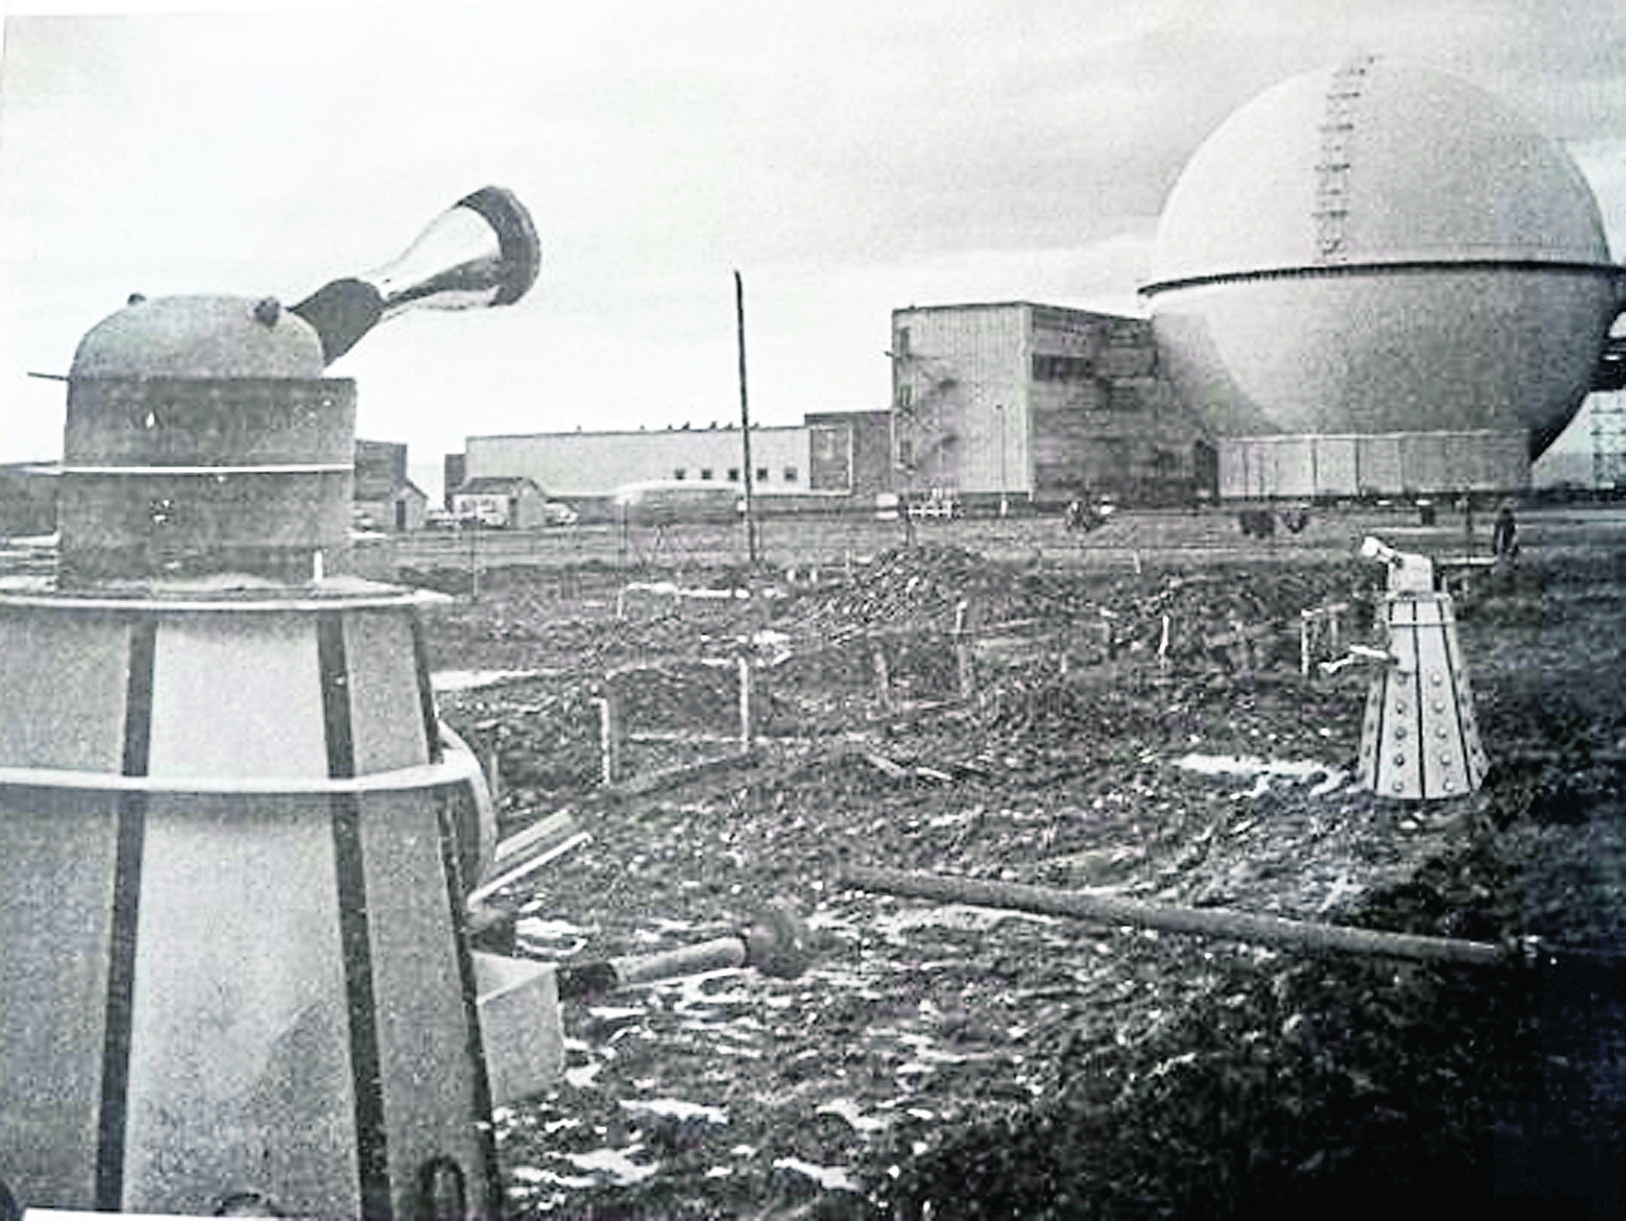 The Dr Who Daleks visit Dounreay.

FB pic with permission.